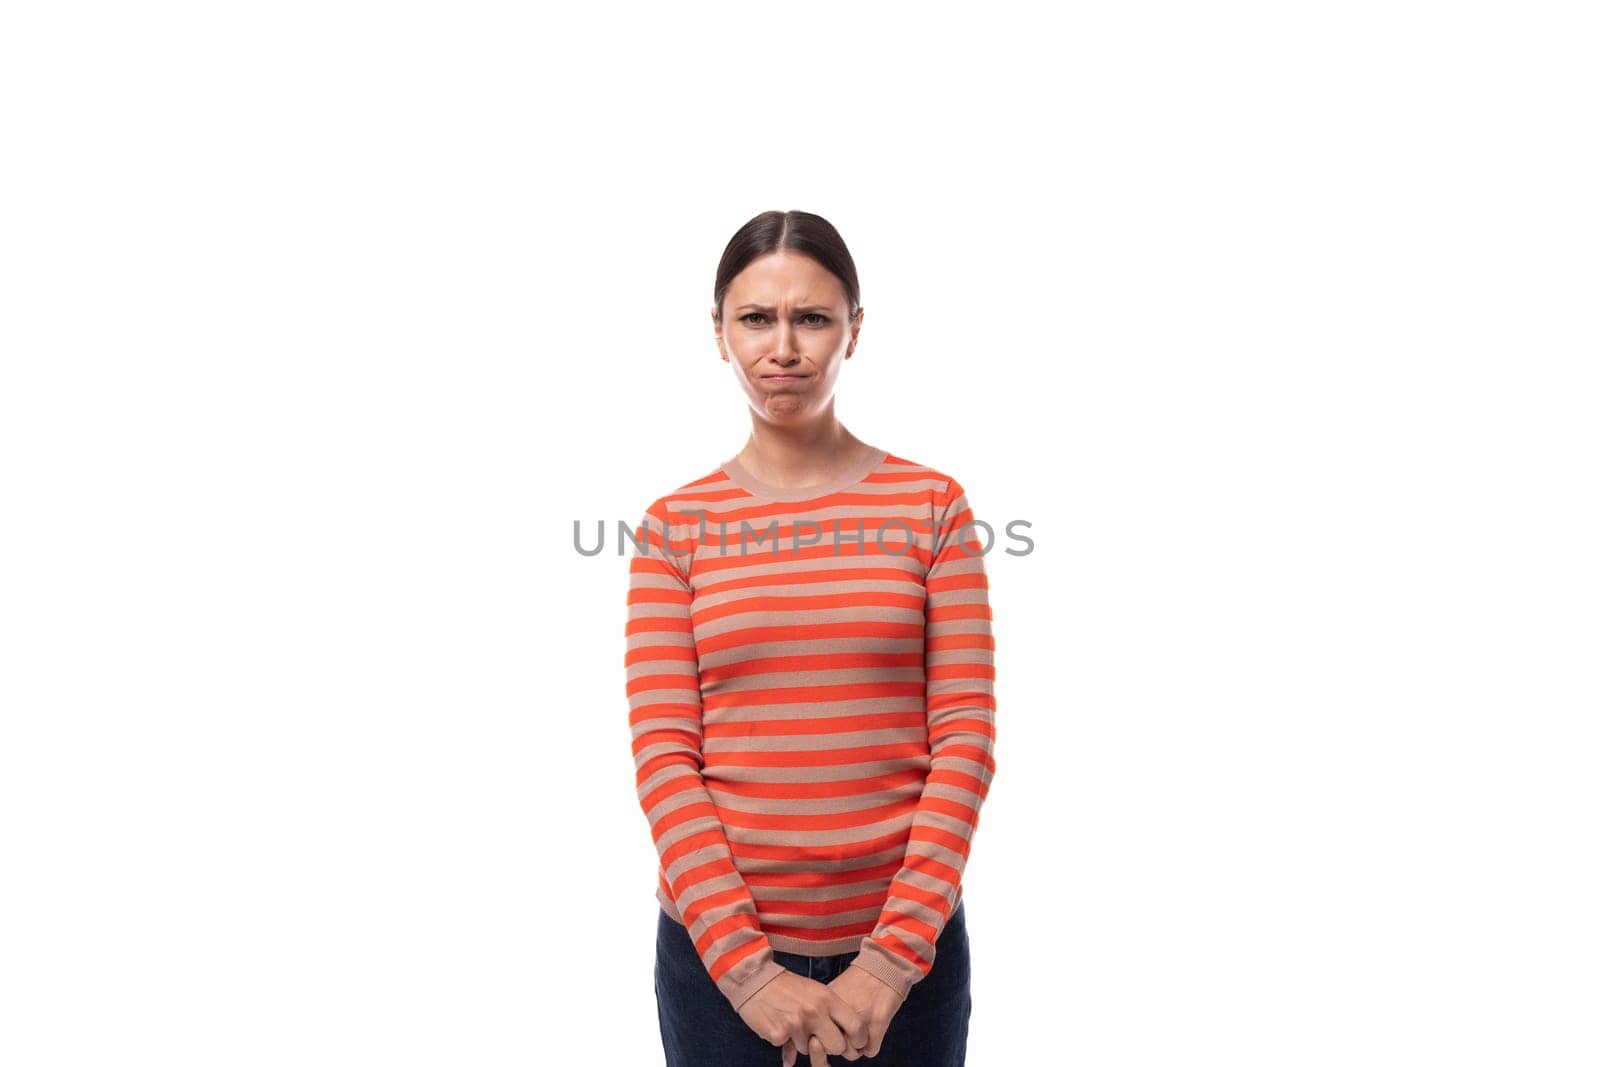 sullen young adult woman with black hair dressed in an orange sweater is angry by TRMK